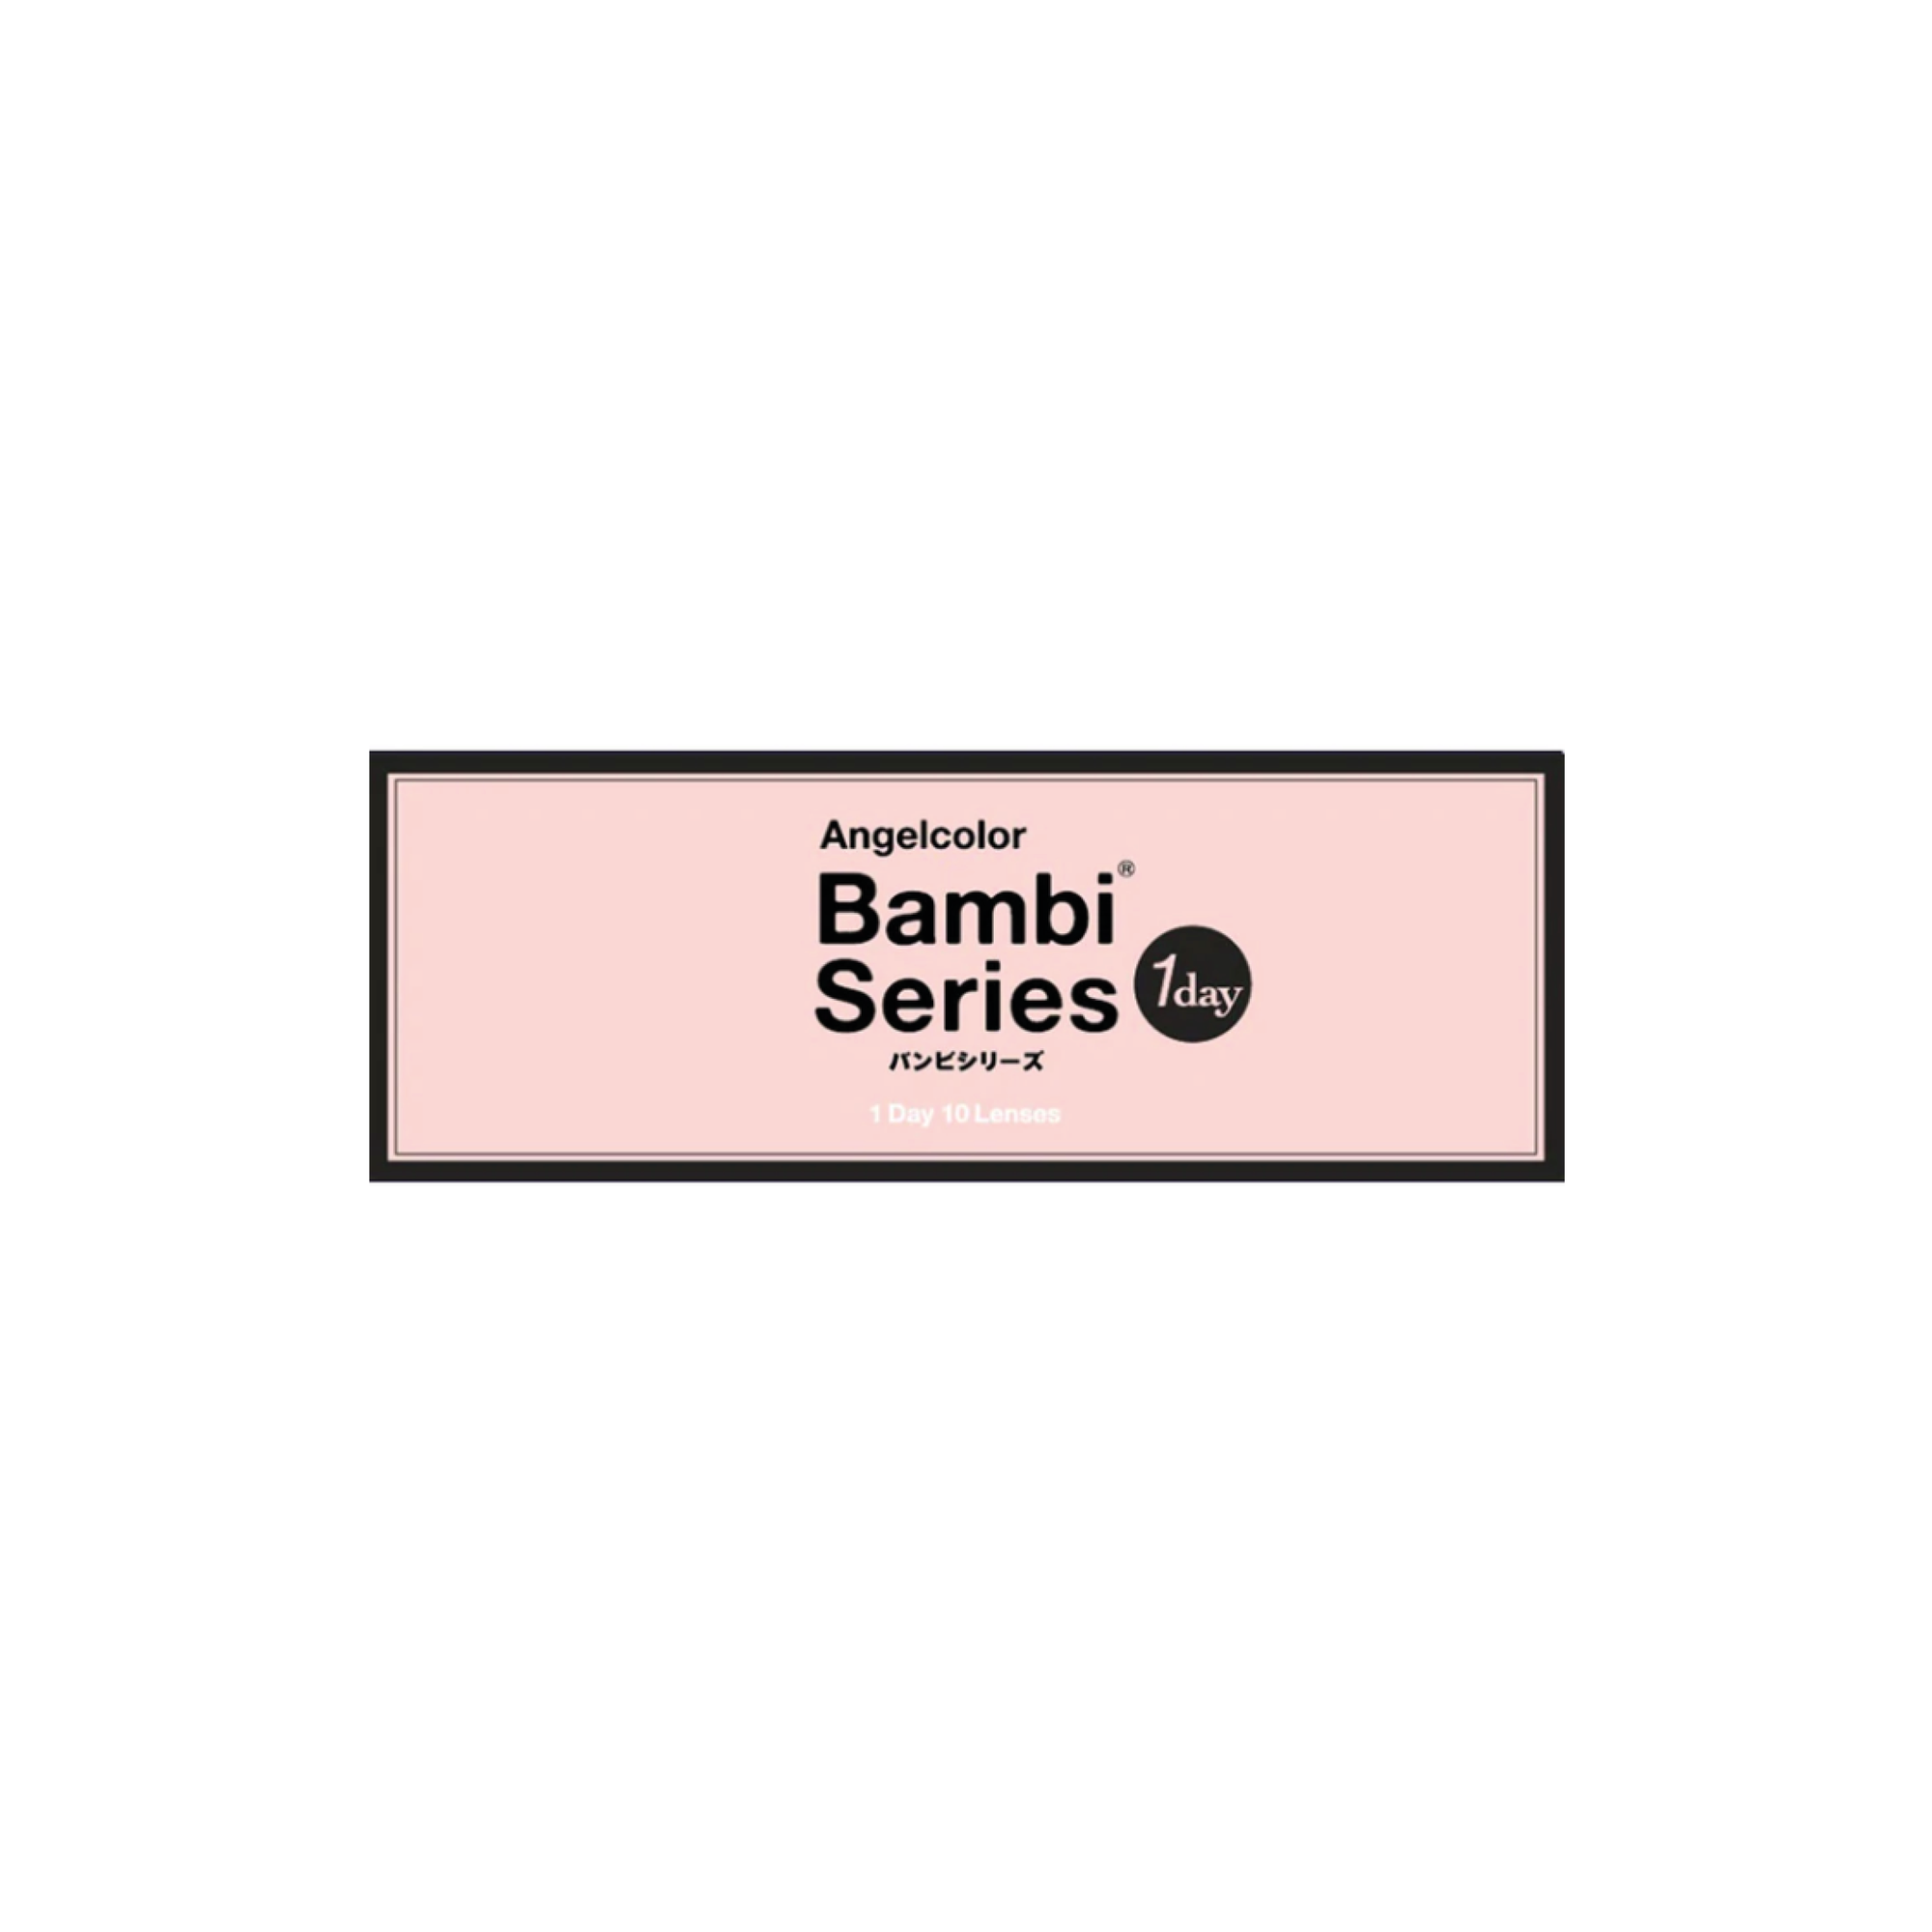 Bambi series 1-Day color contact lens UV #Cassis brown日抛美瞳黑加仑棕｜10 Pcs